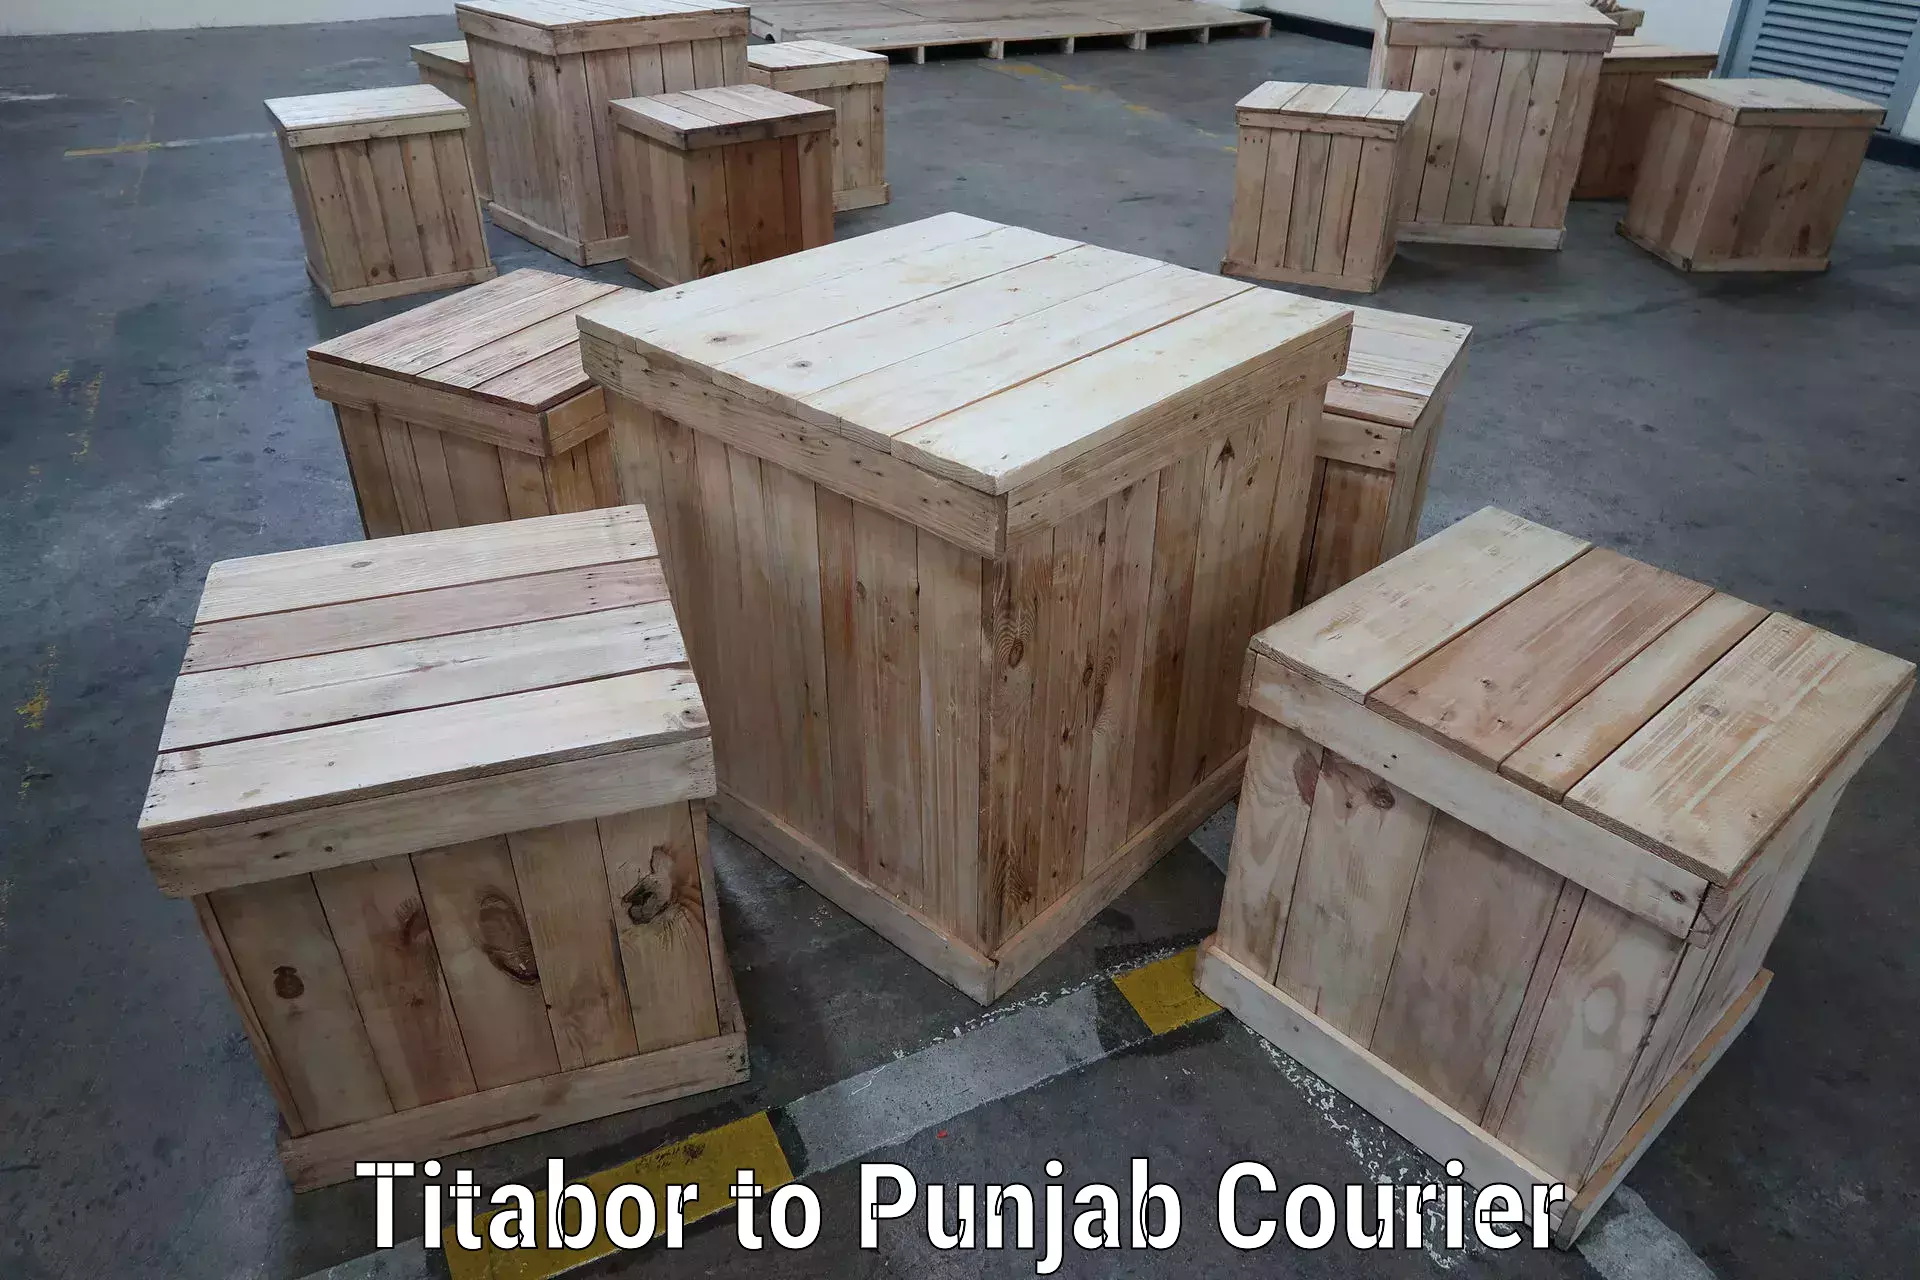 Advanced tracking systems in Titabor to Punjab